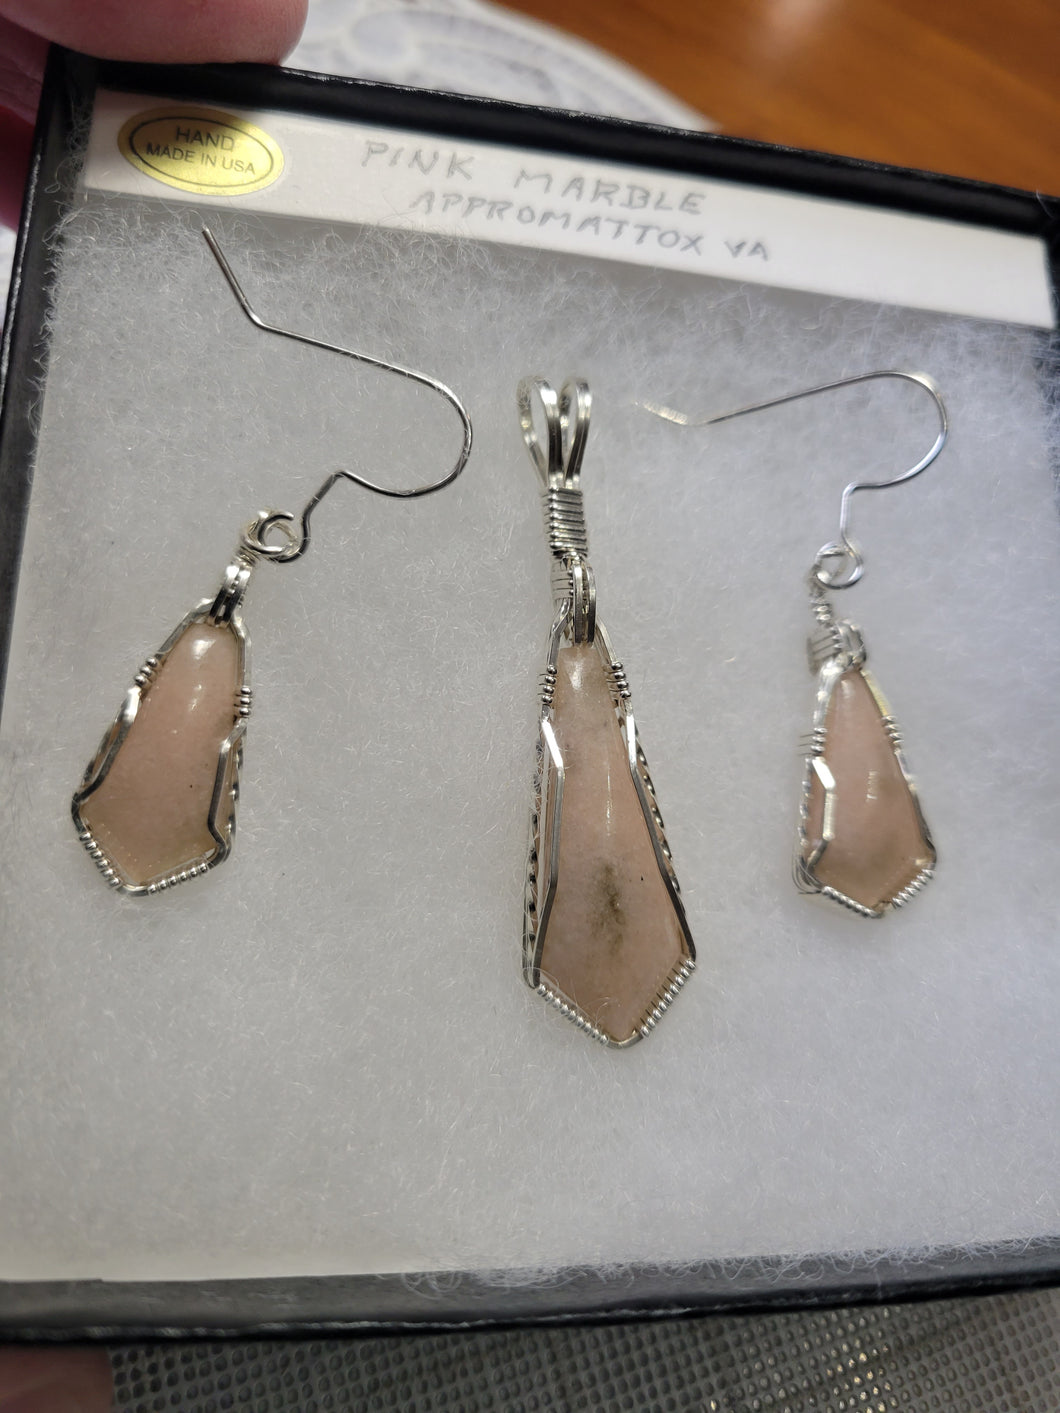 Custom Wire Wrapped Pink Marble Appomattox, VA Set Necklace/Pendant Earrings in Sterling Silver